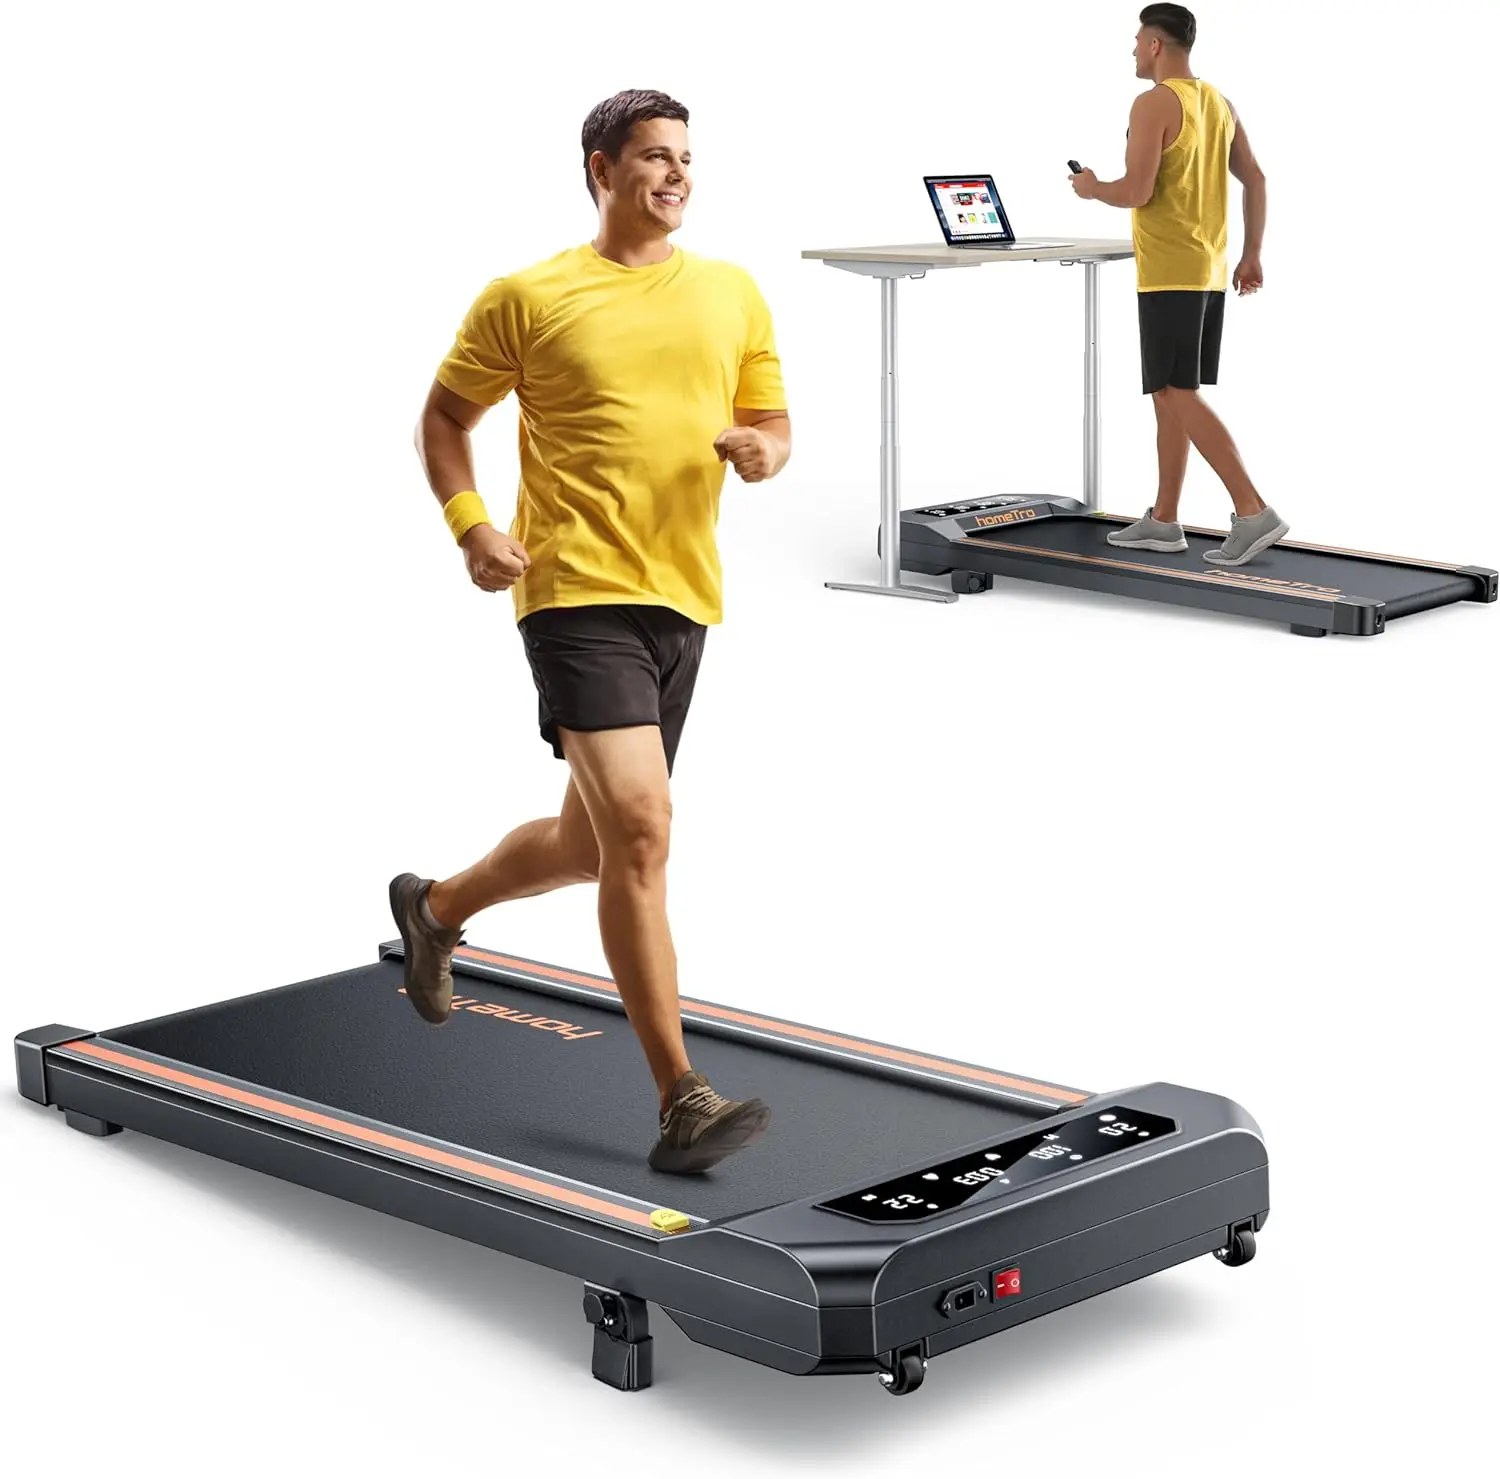 

2.5HP Walking Pad with Incline, Compact Treadmill for Home/Office, Portable Under Desk Treadmills 300lbs for Jogging/Running